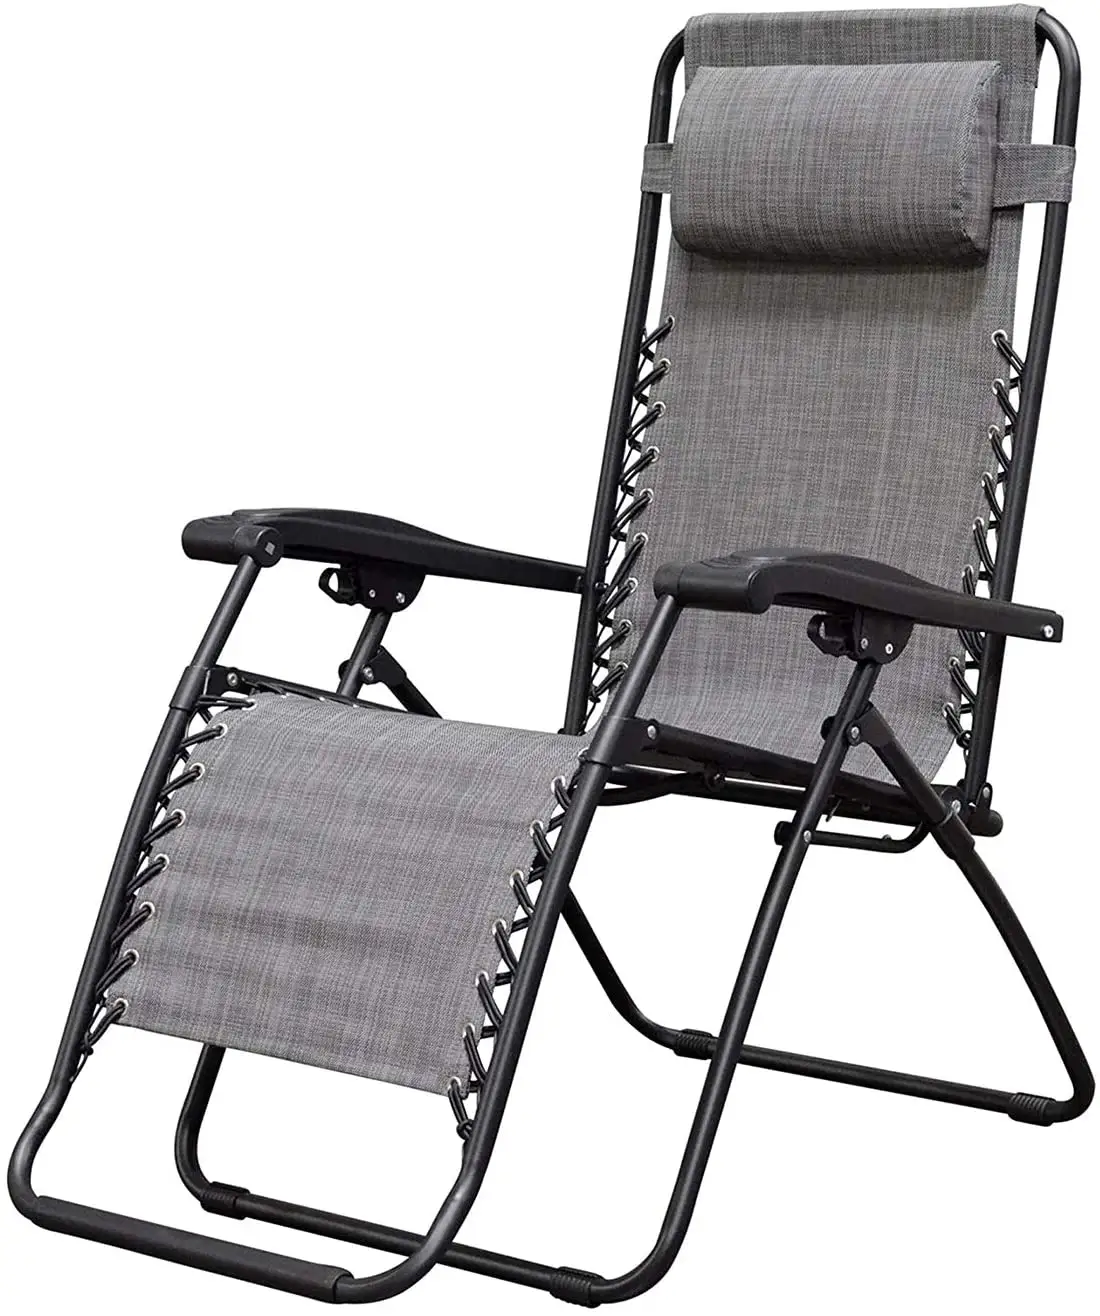 Lightweight Outdoor Zero Gravity, Sun Lounge Adjustable Folding Metal Recliner For Hiking Garden Camping Chairs With Cup Holder/